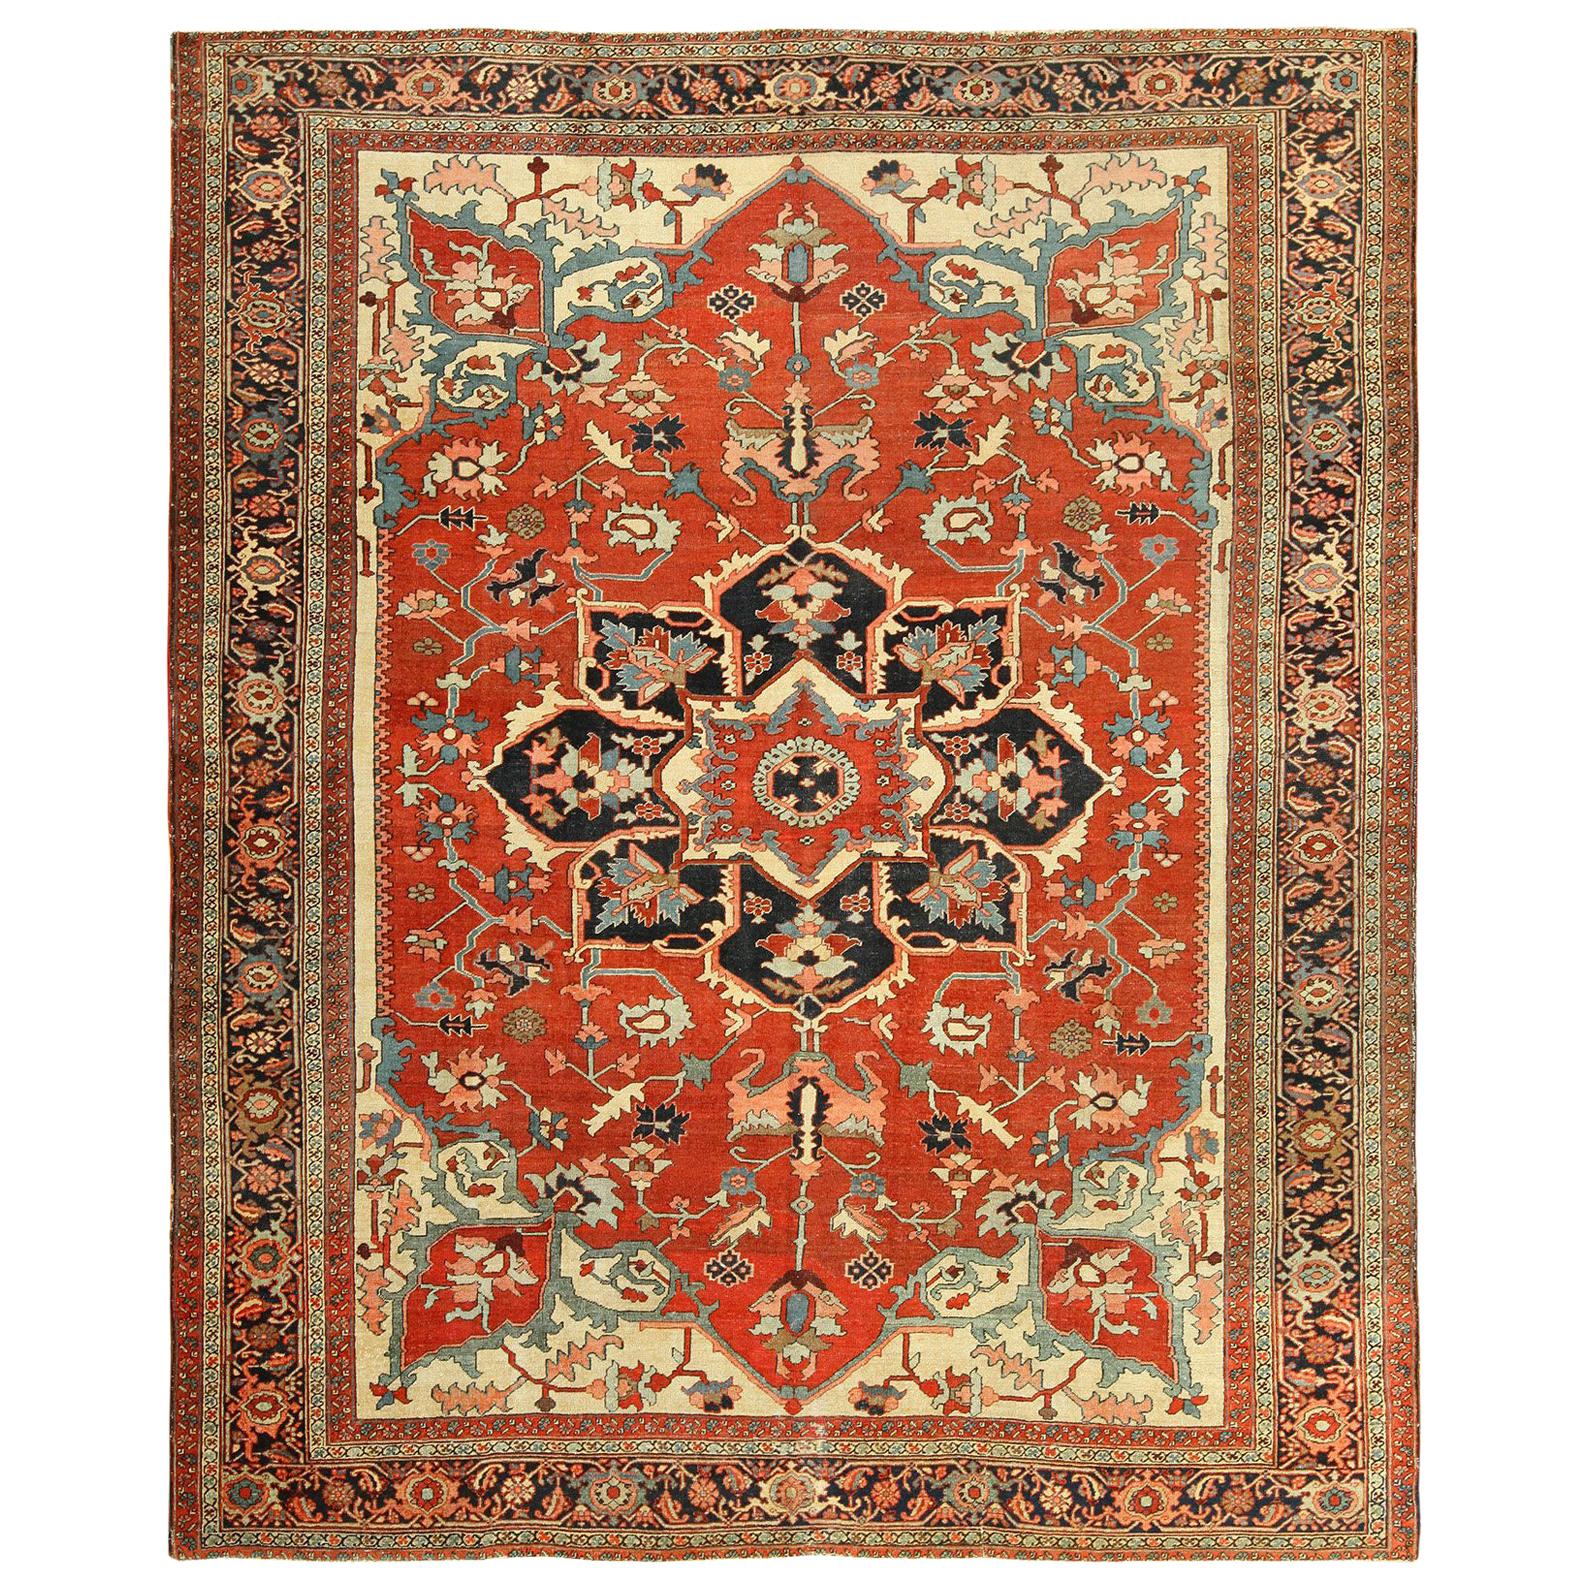 Nazmiyal Collection Antique Serapi Persian Rug. Size: 9 ft x 10 ft 9 in 